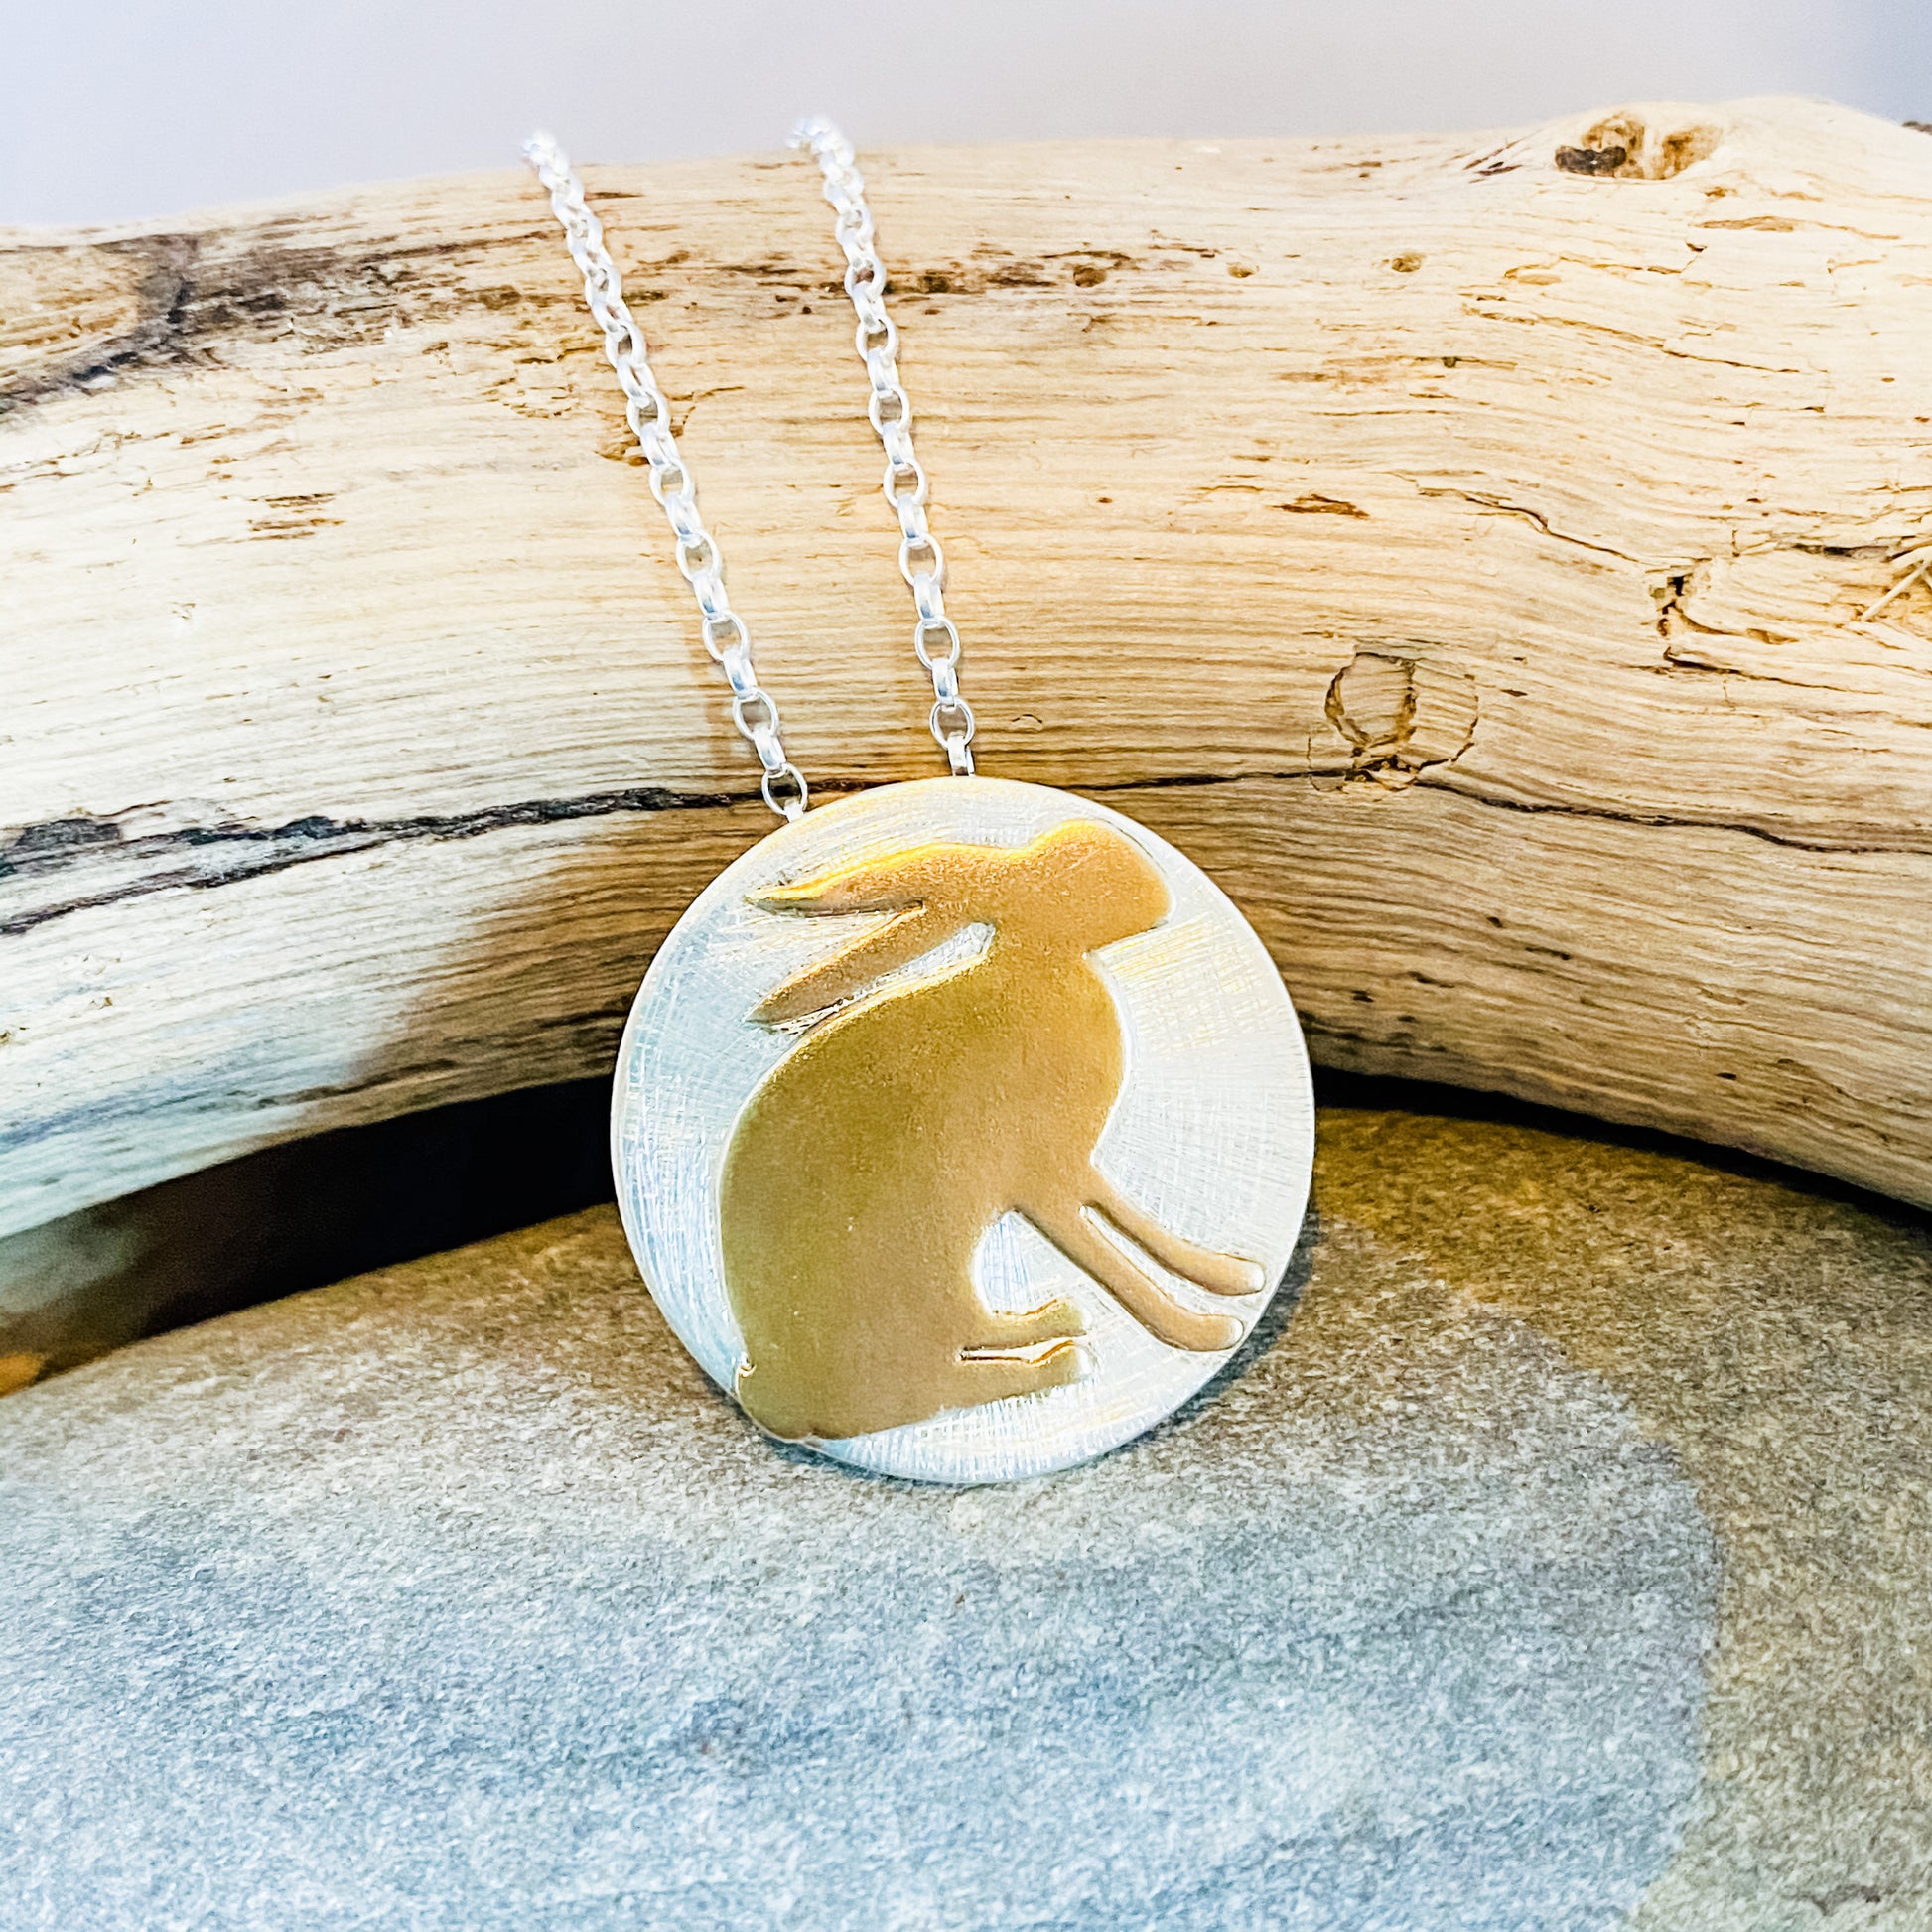 Golden Hare, Necklace, Small Dog Silver